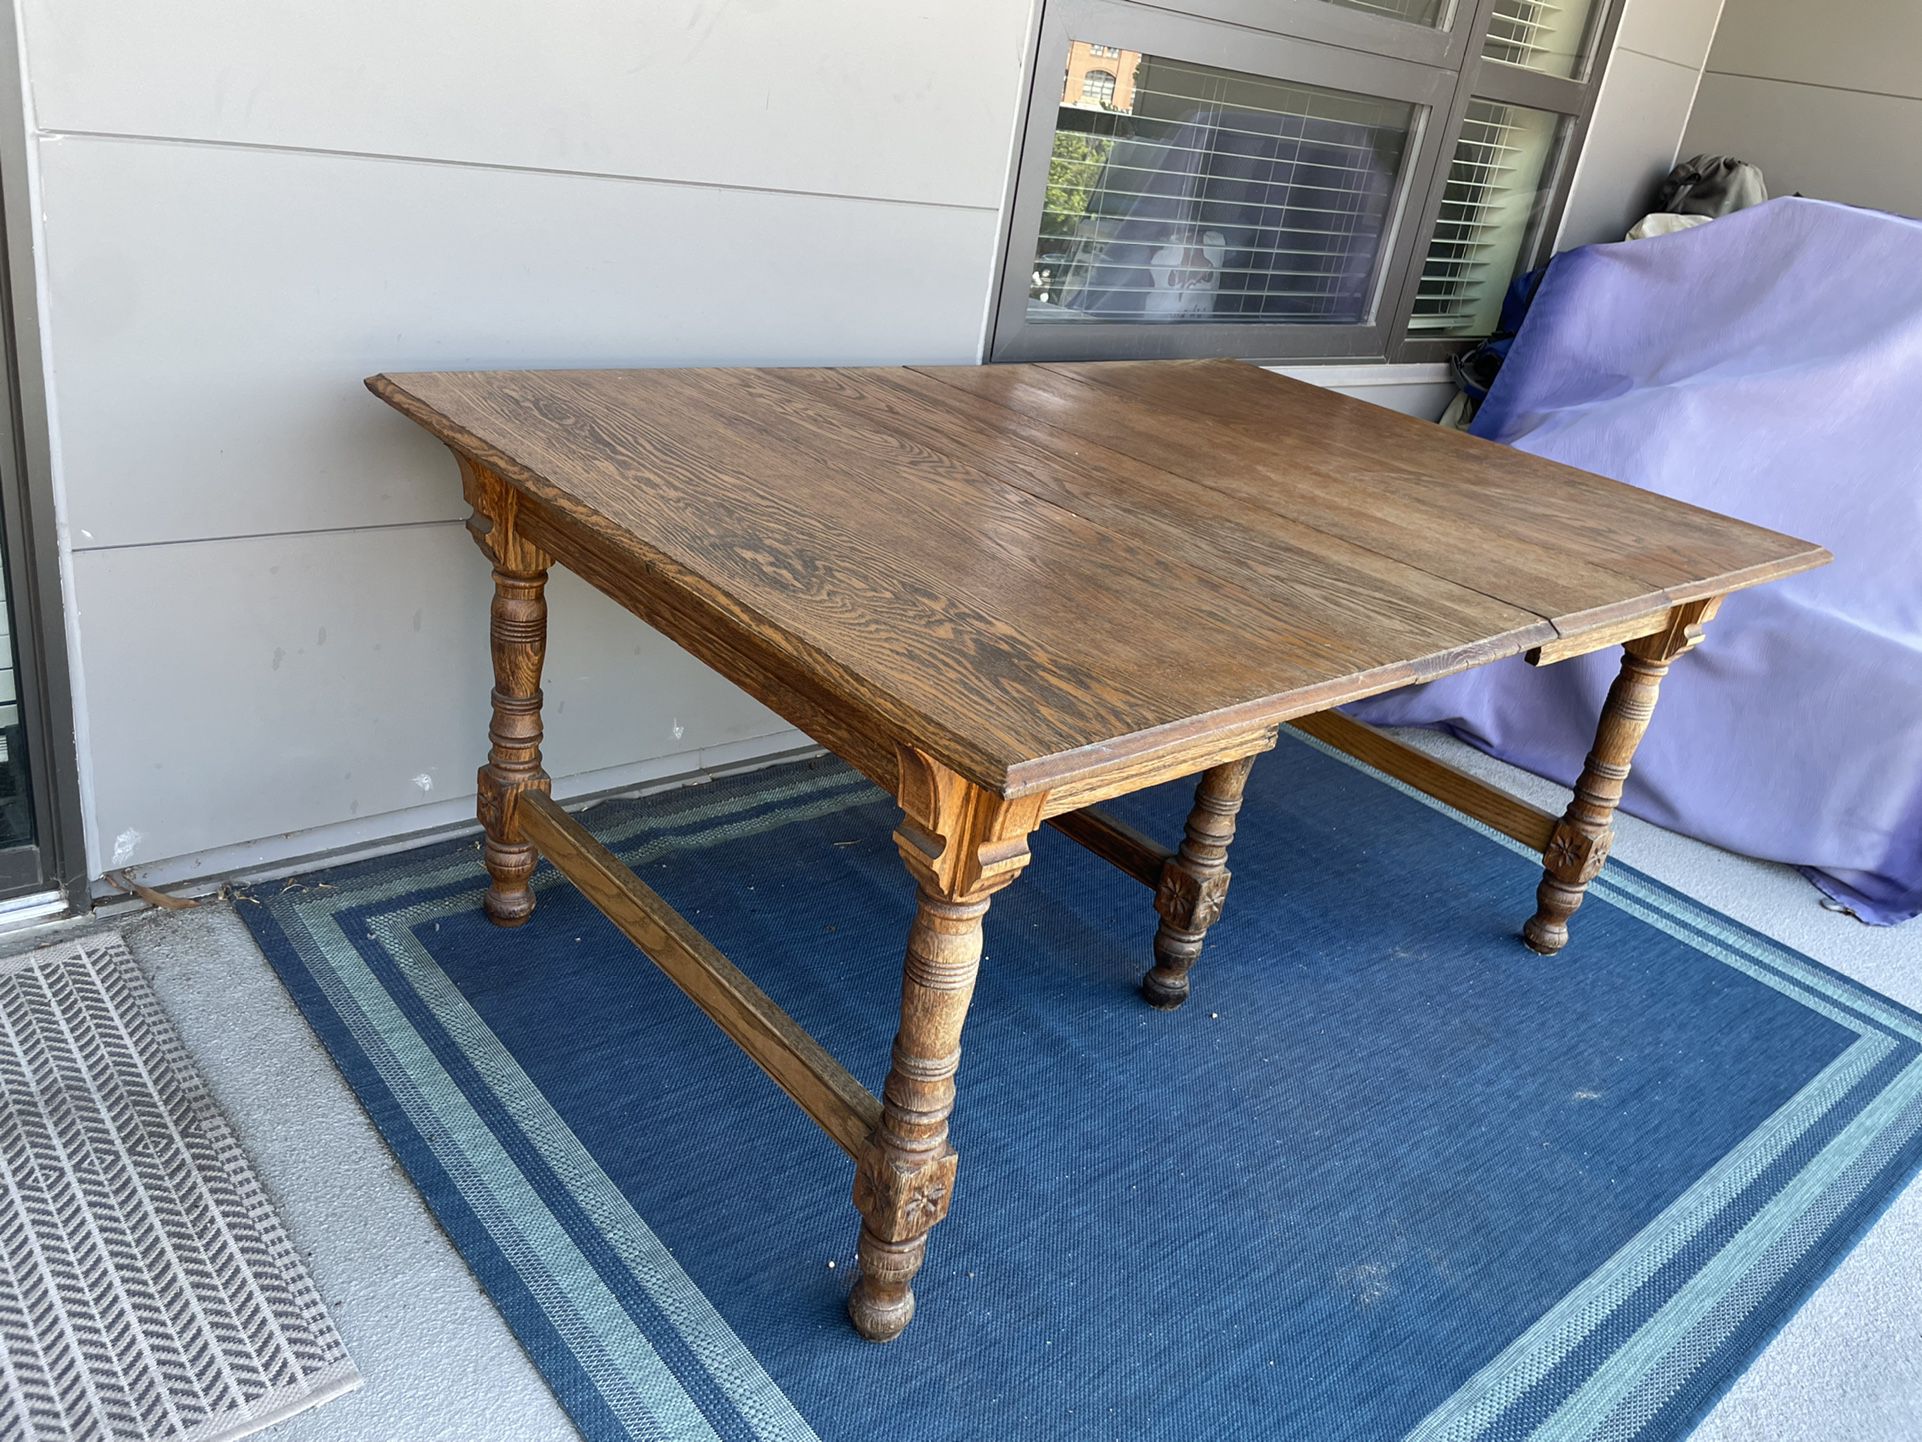 Antique Solid Oak Dining Room Table with 7 leaves up to 112”L